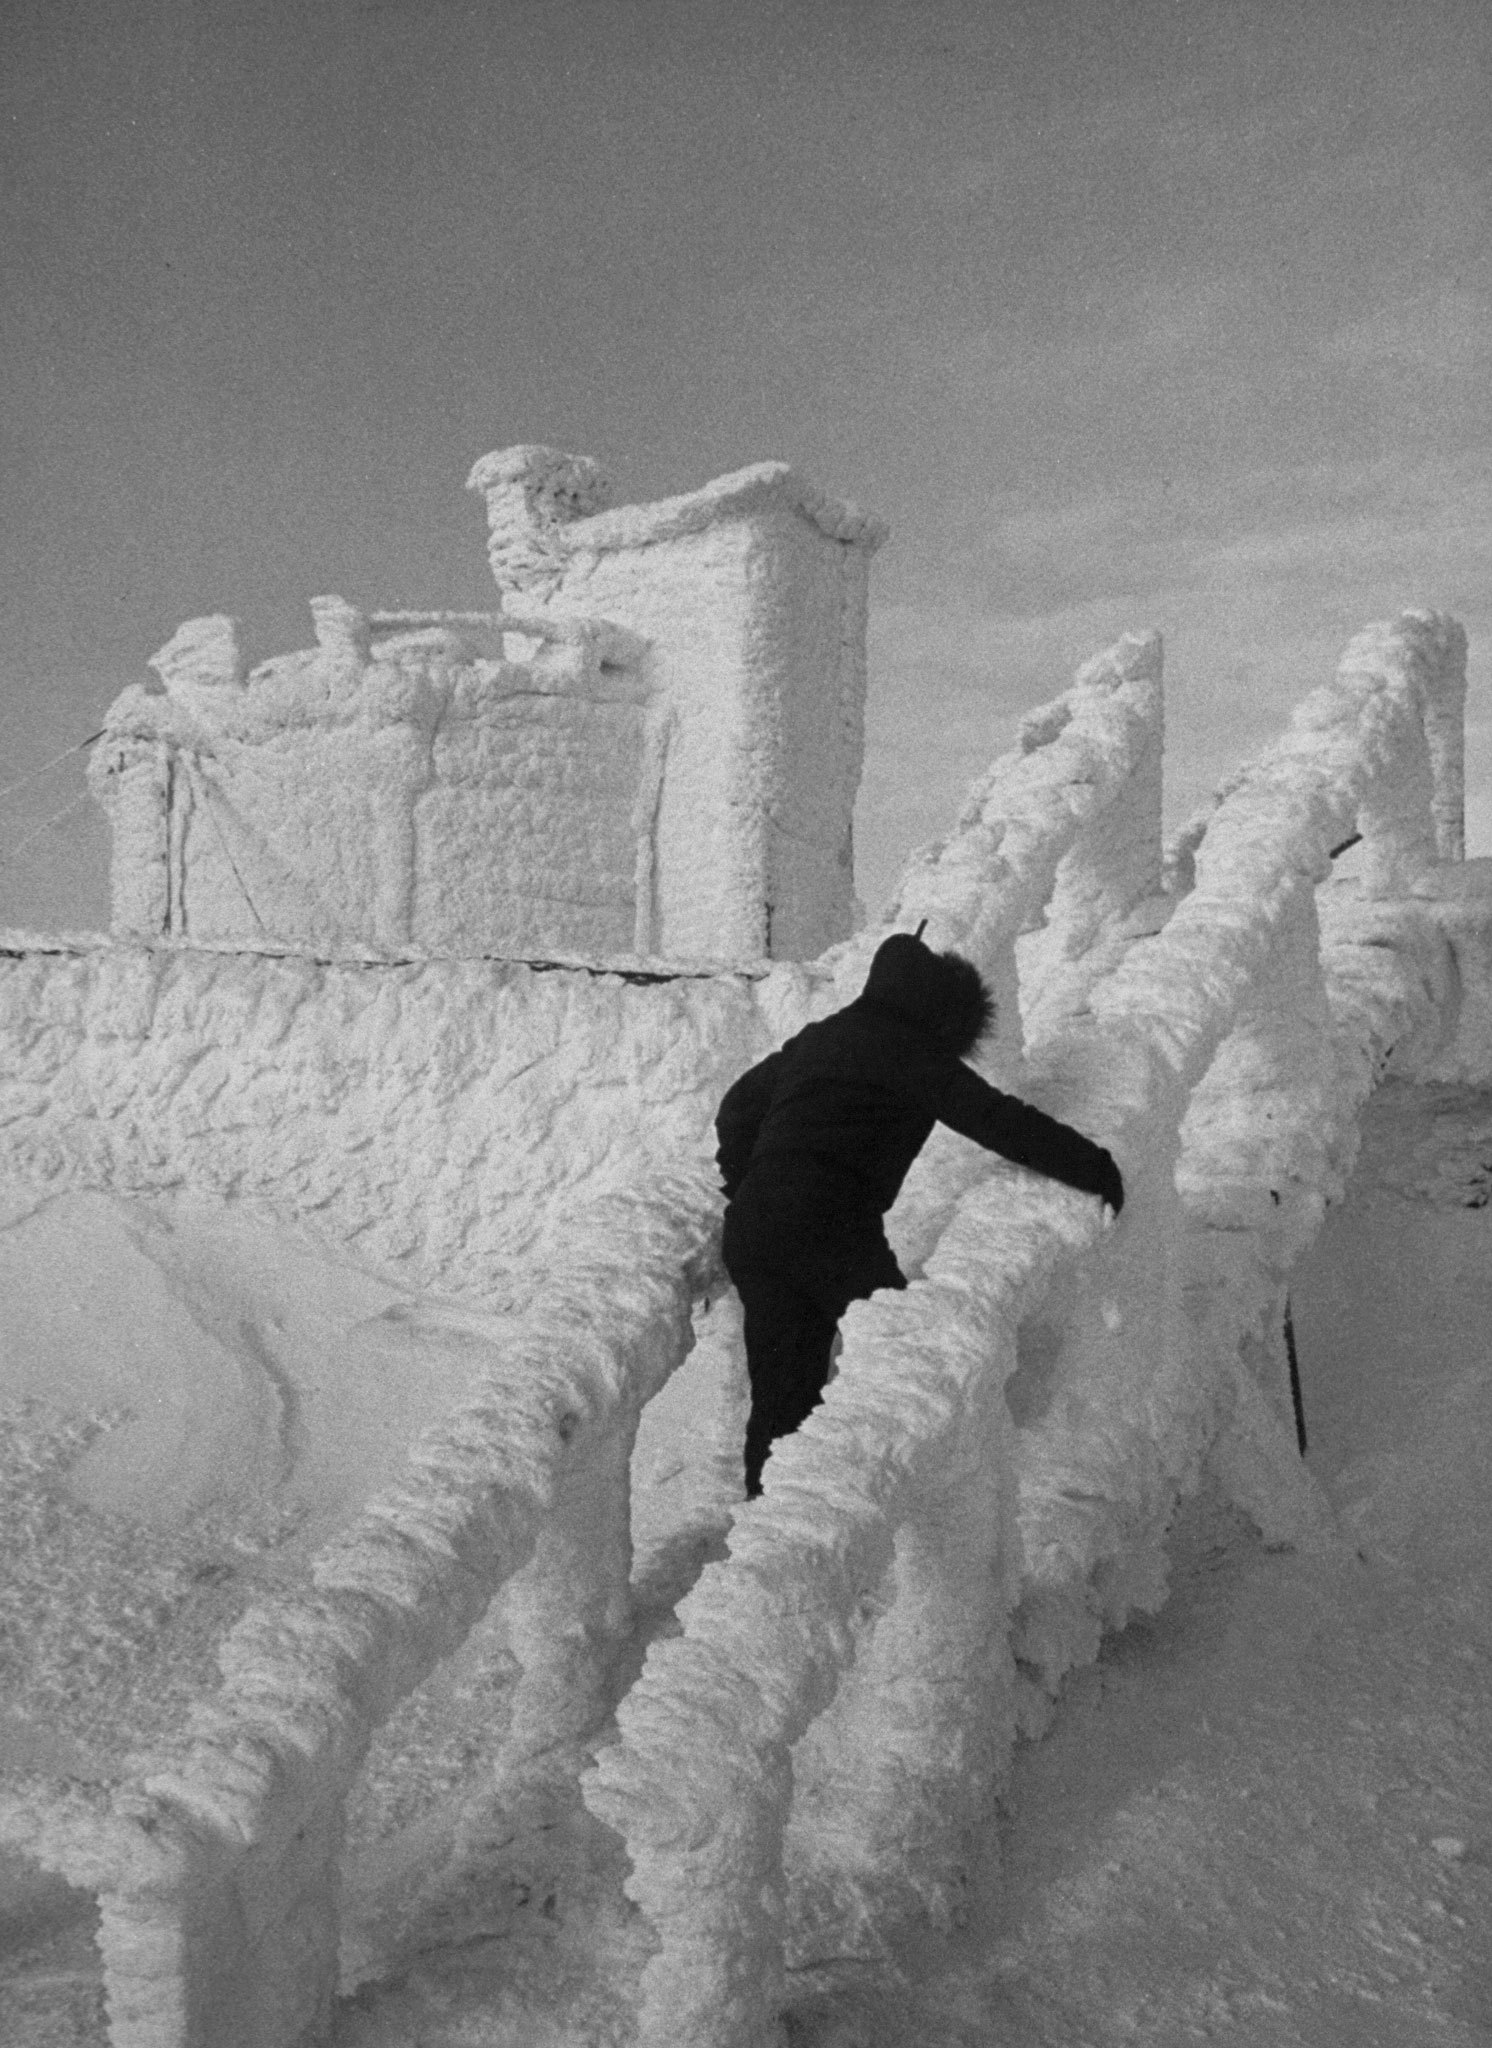 A technician clambers around Summertime Hotel which, in dead of winter, stands castle-like and forbidding, its doors and windows sealed with foot of ice.